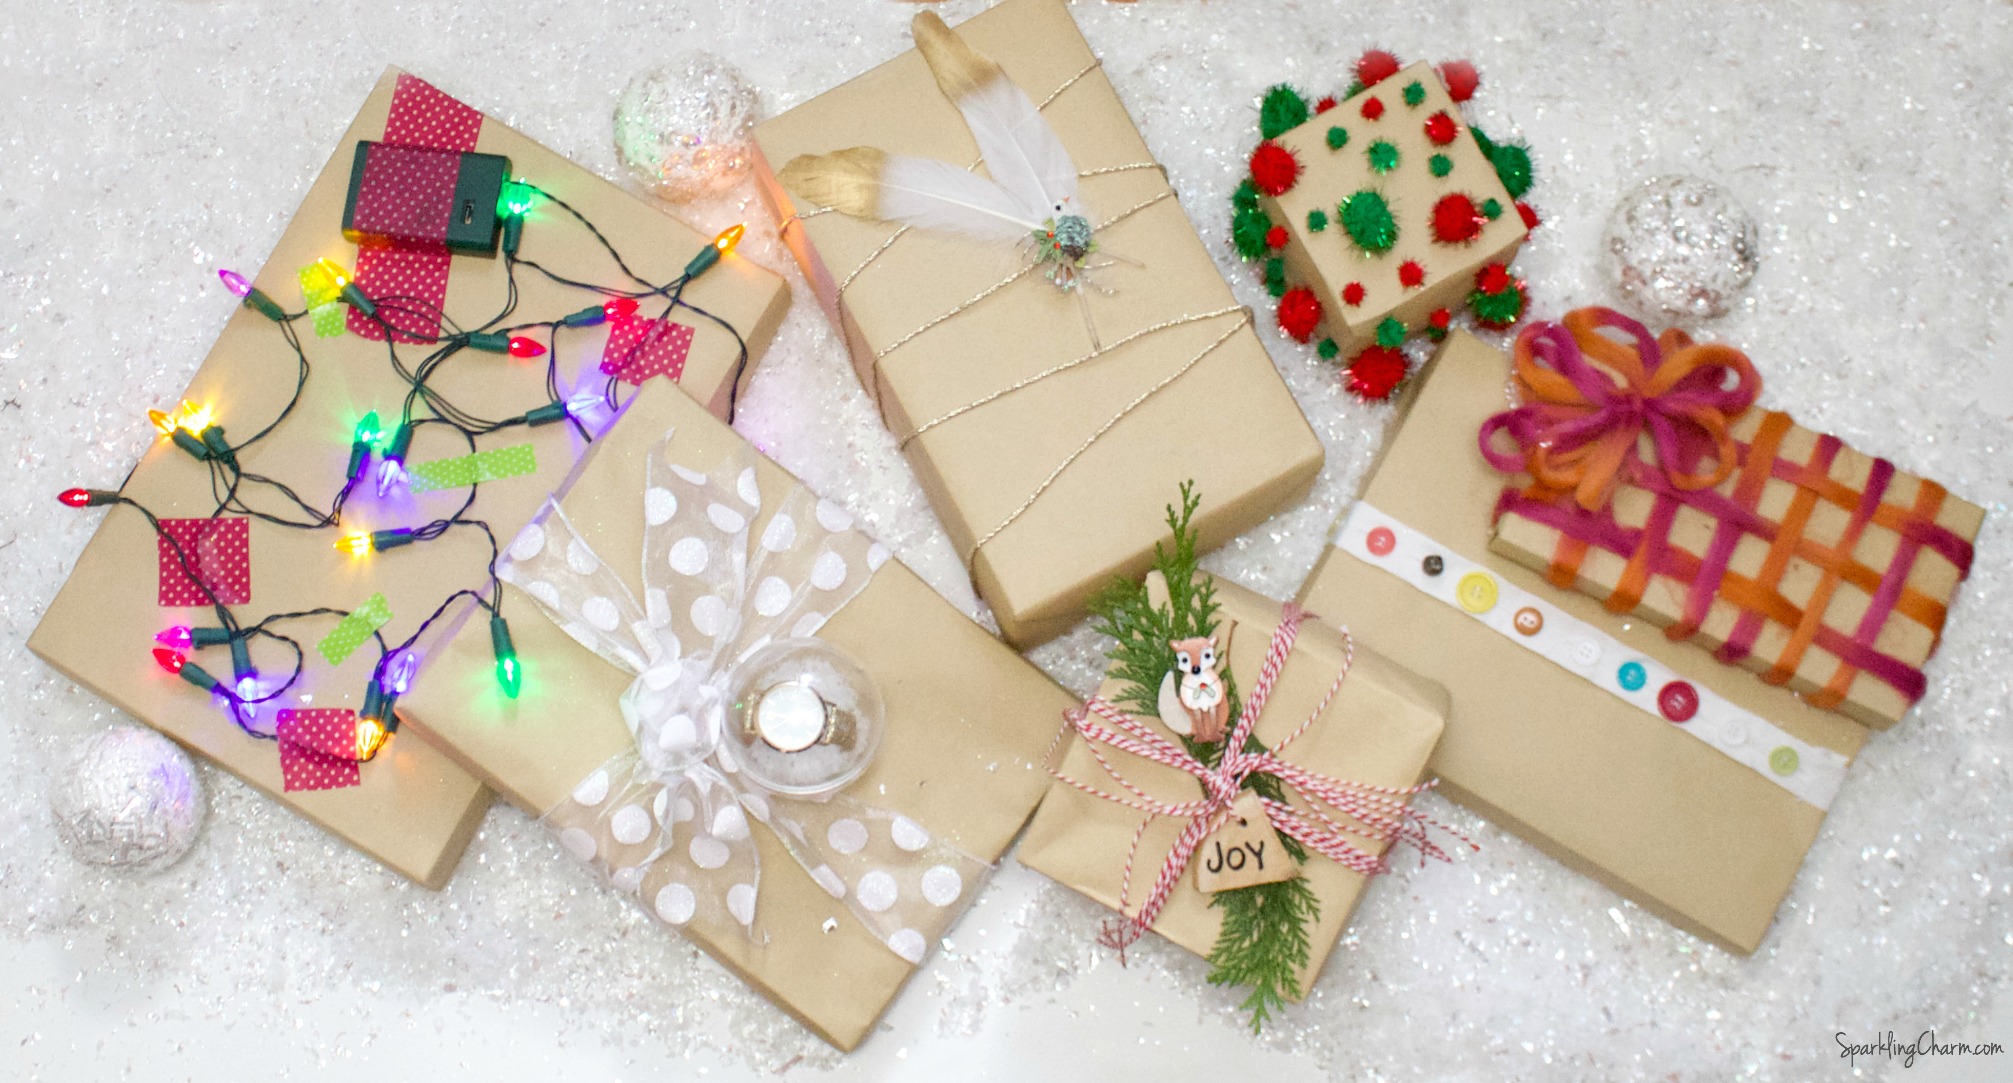 7 Fresh Ways To Add Charm to a Wrapped Gift